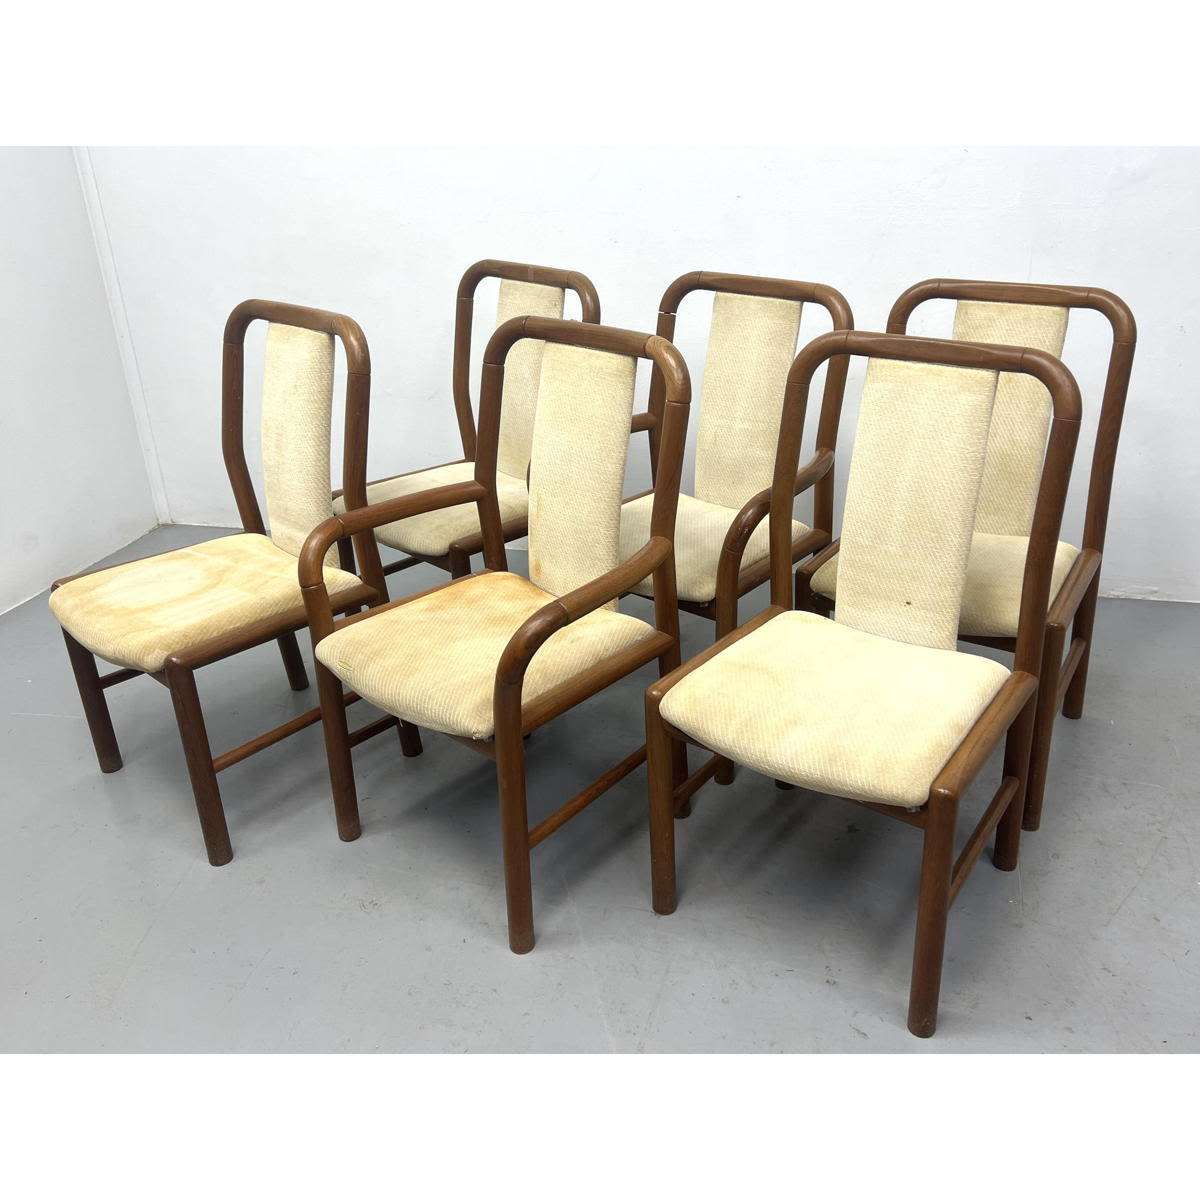 6 Teak Dining Chairs 4 Side Chairs 3ad679